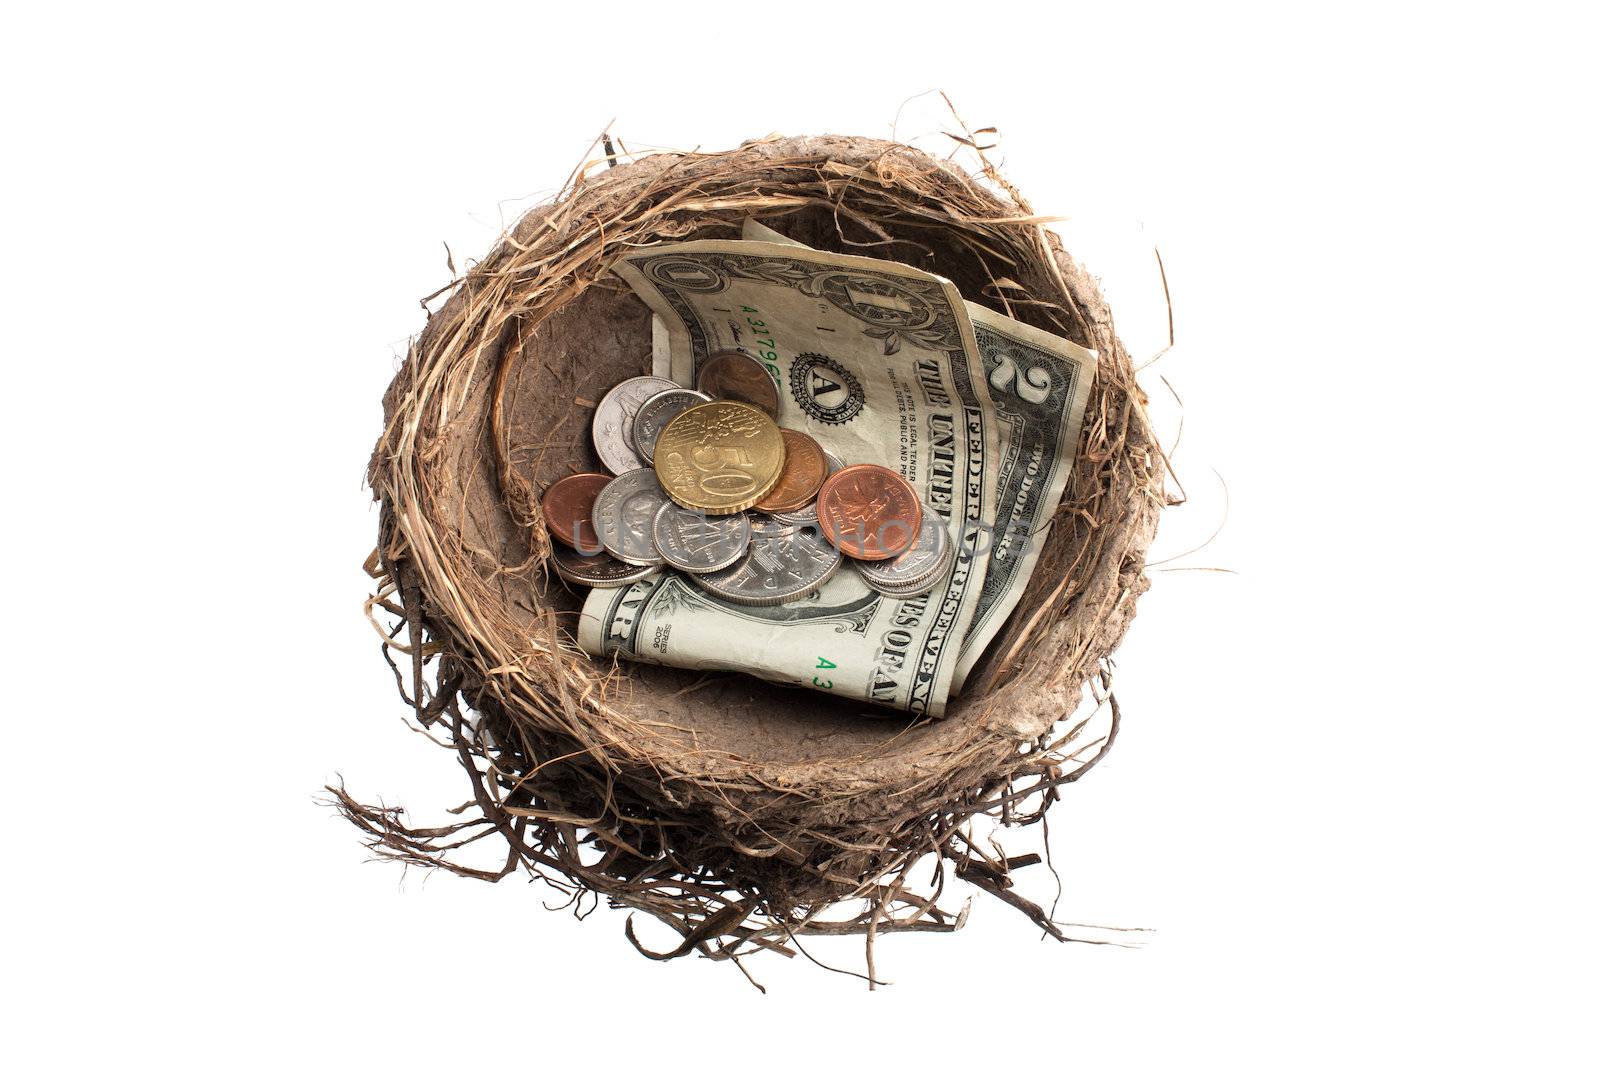 image of nest with coins and paper currency by kozzi